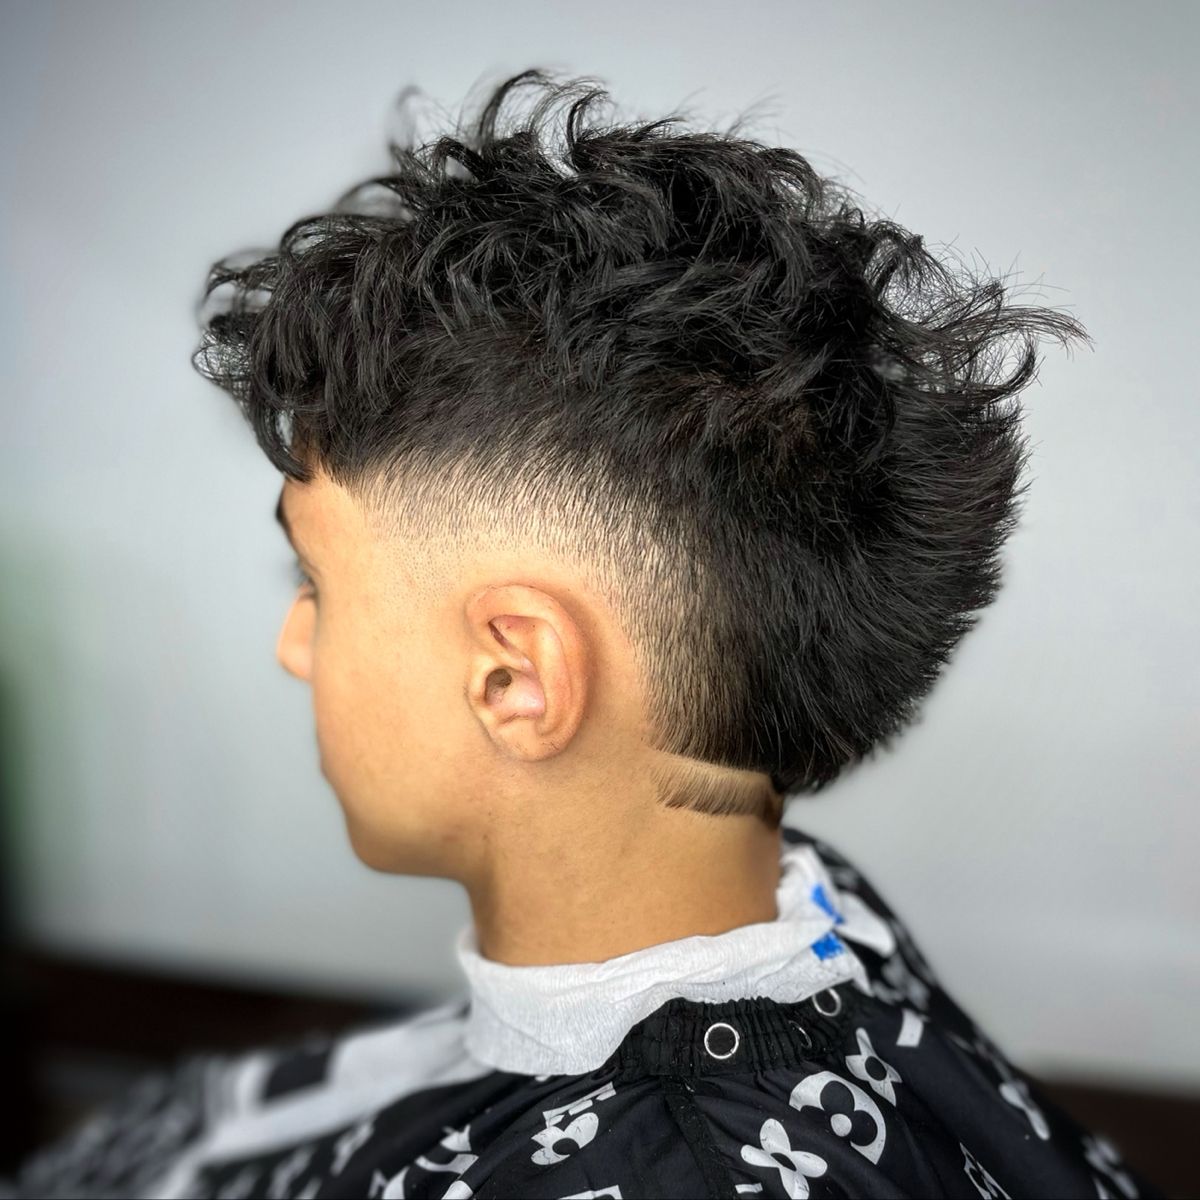 10 Best Burst Fade Mullet Curly Hair Style for Men 2023